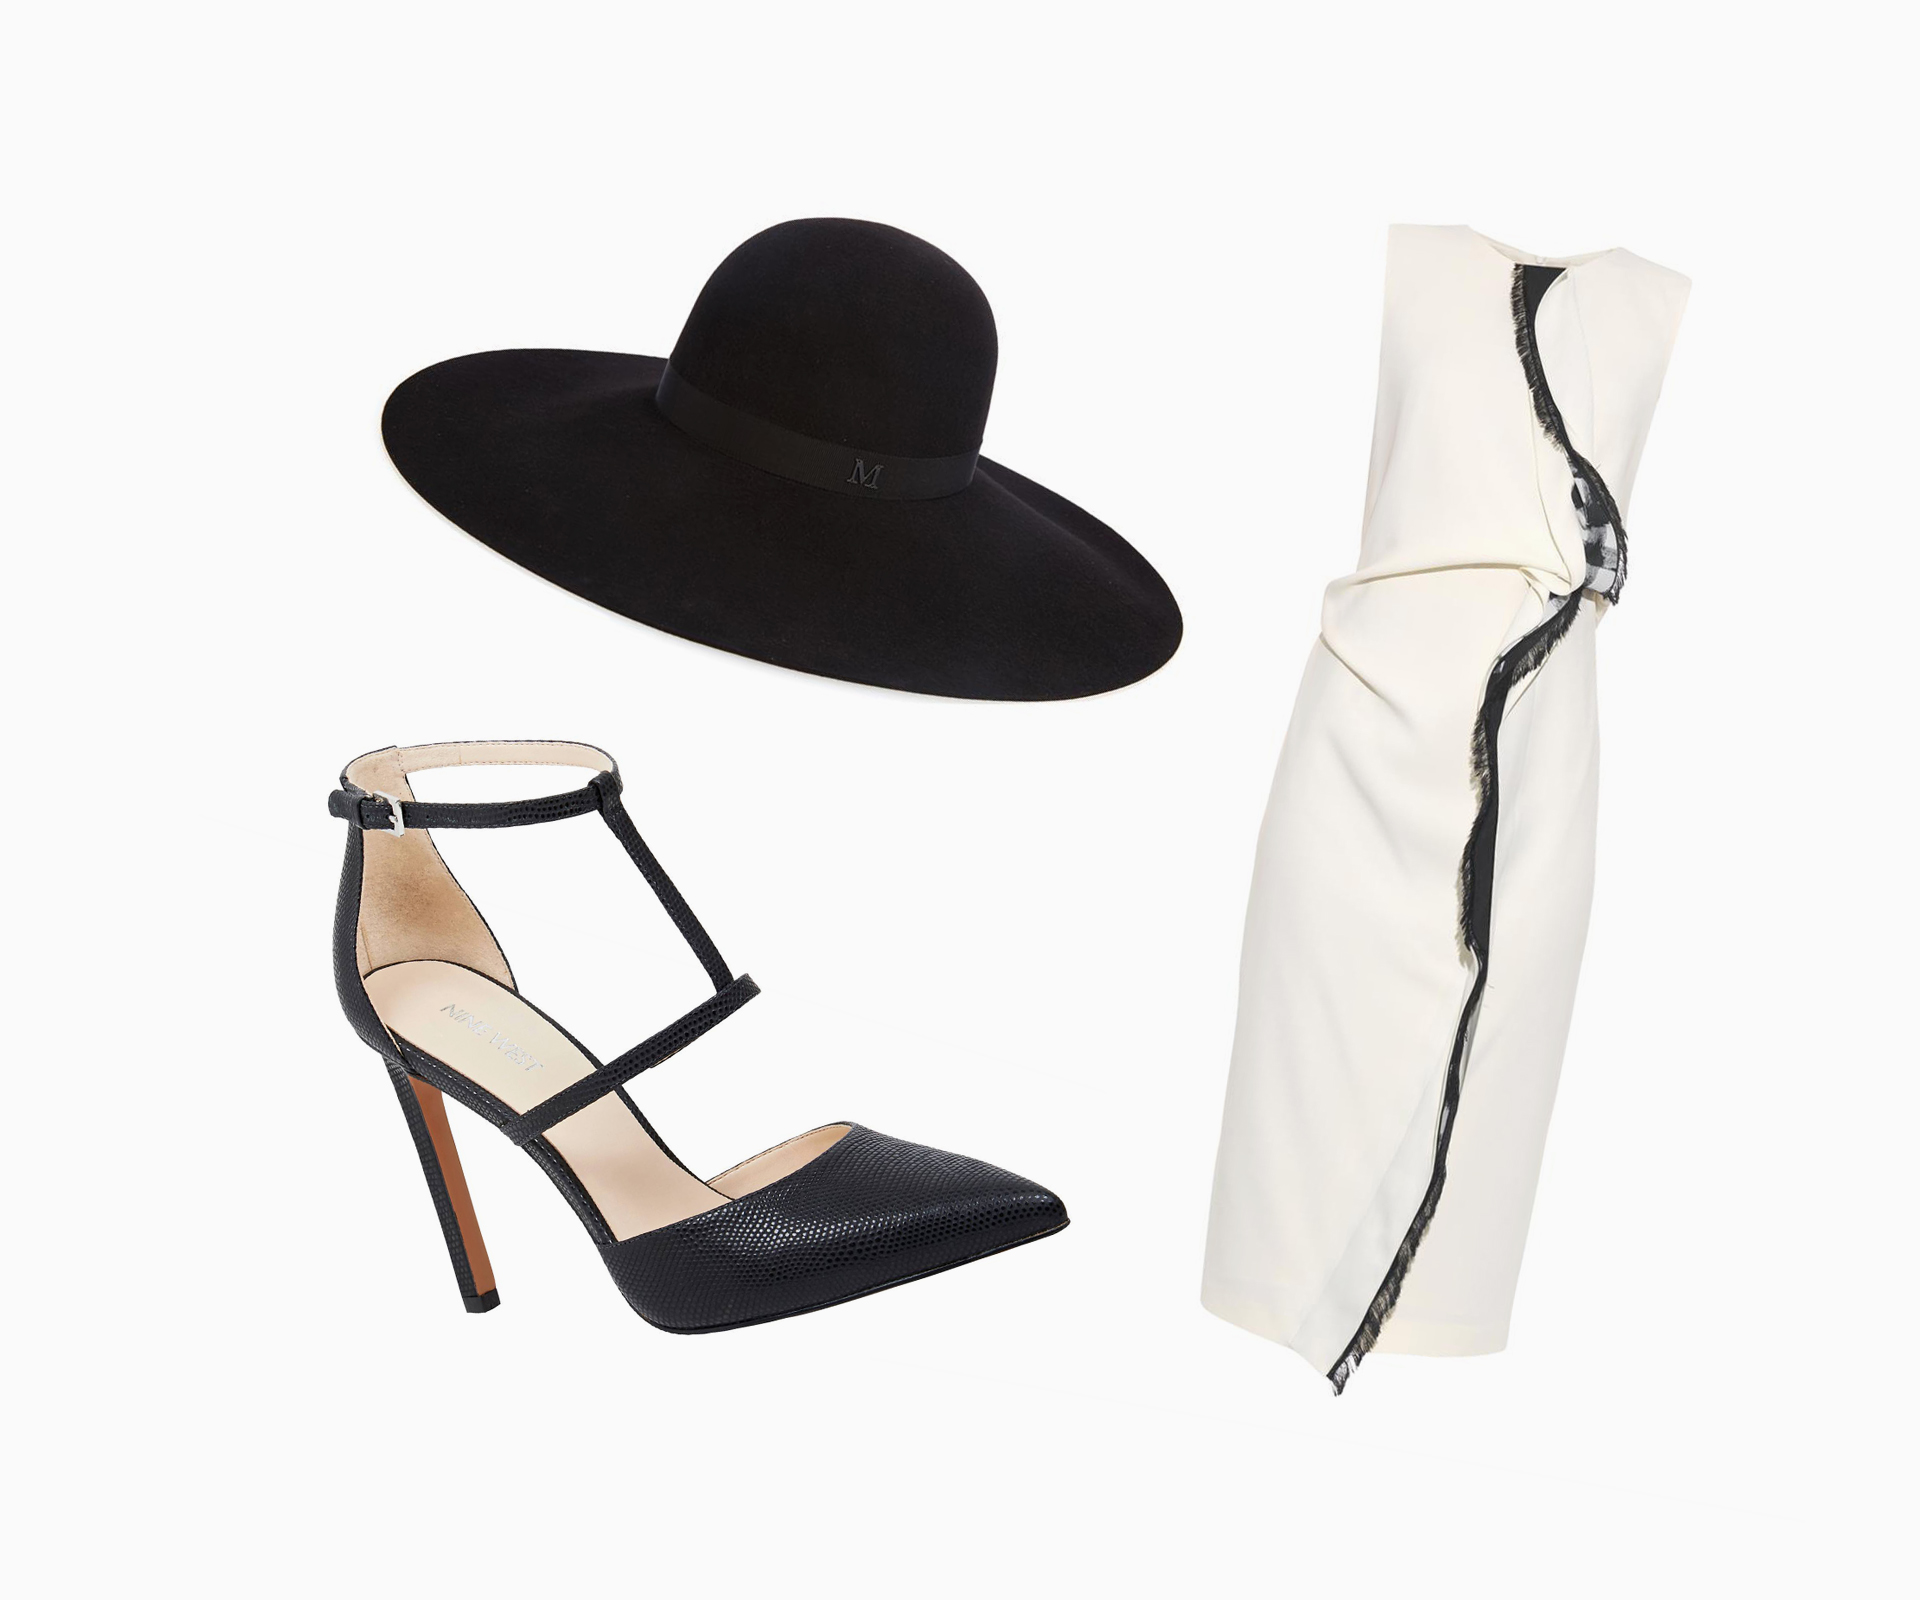 Heading to the races tomorrow? Inspo sorted.